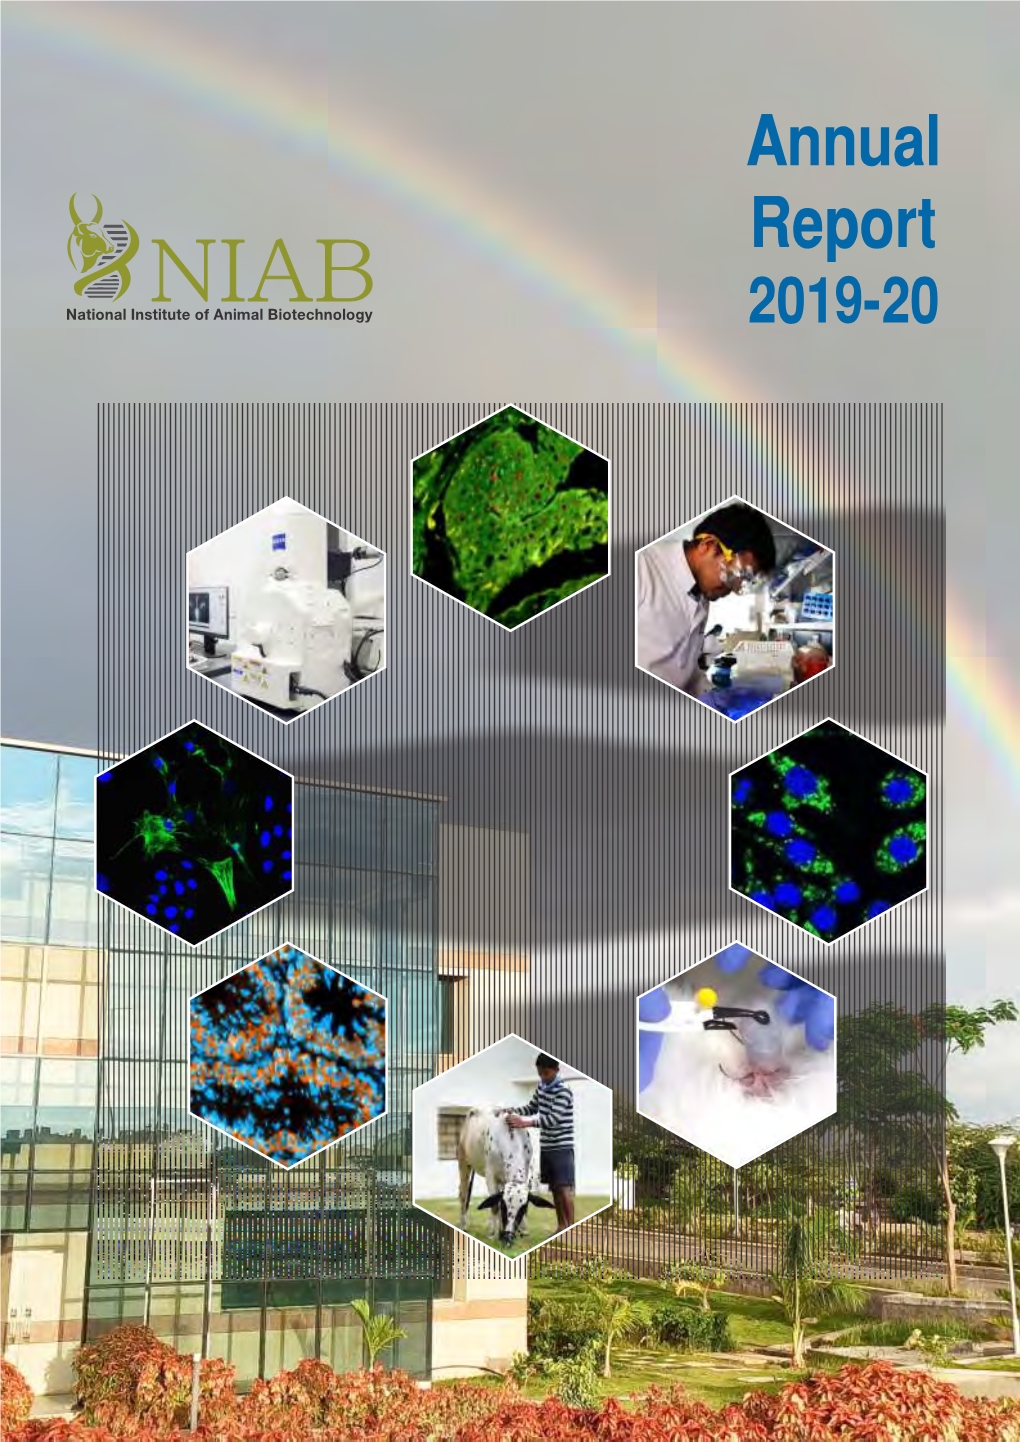 Annual Report Have Been Captured in the Campus of NIAB Annual Report | 2019-20